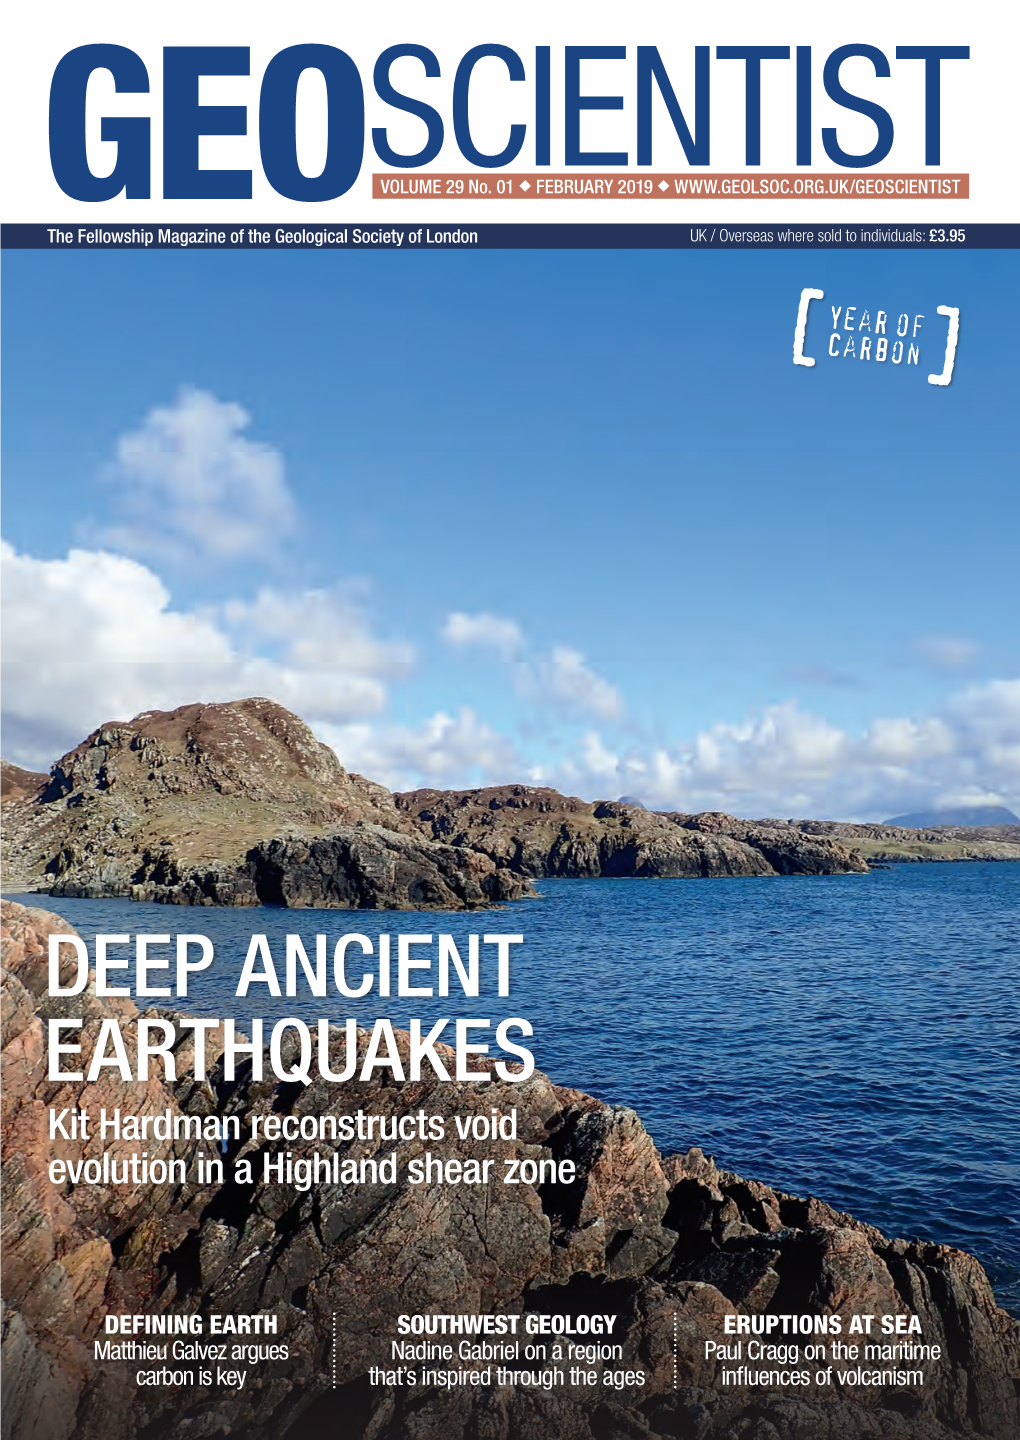 DEEP ANCIENT EARTHQUAKES Kit Hardman Reconstructs Void Evolution in a Highland Shear Zone